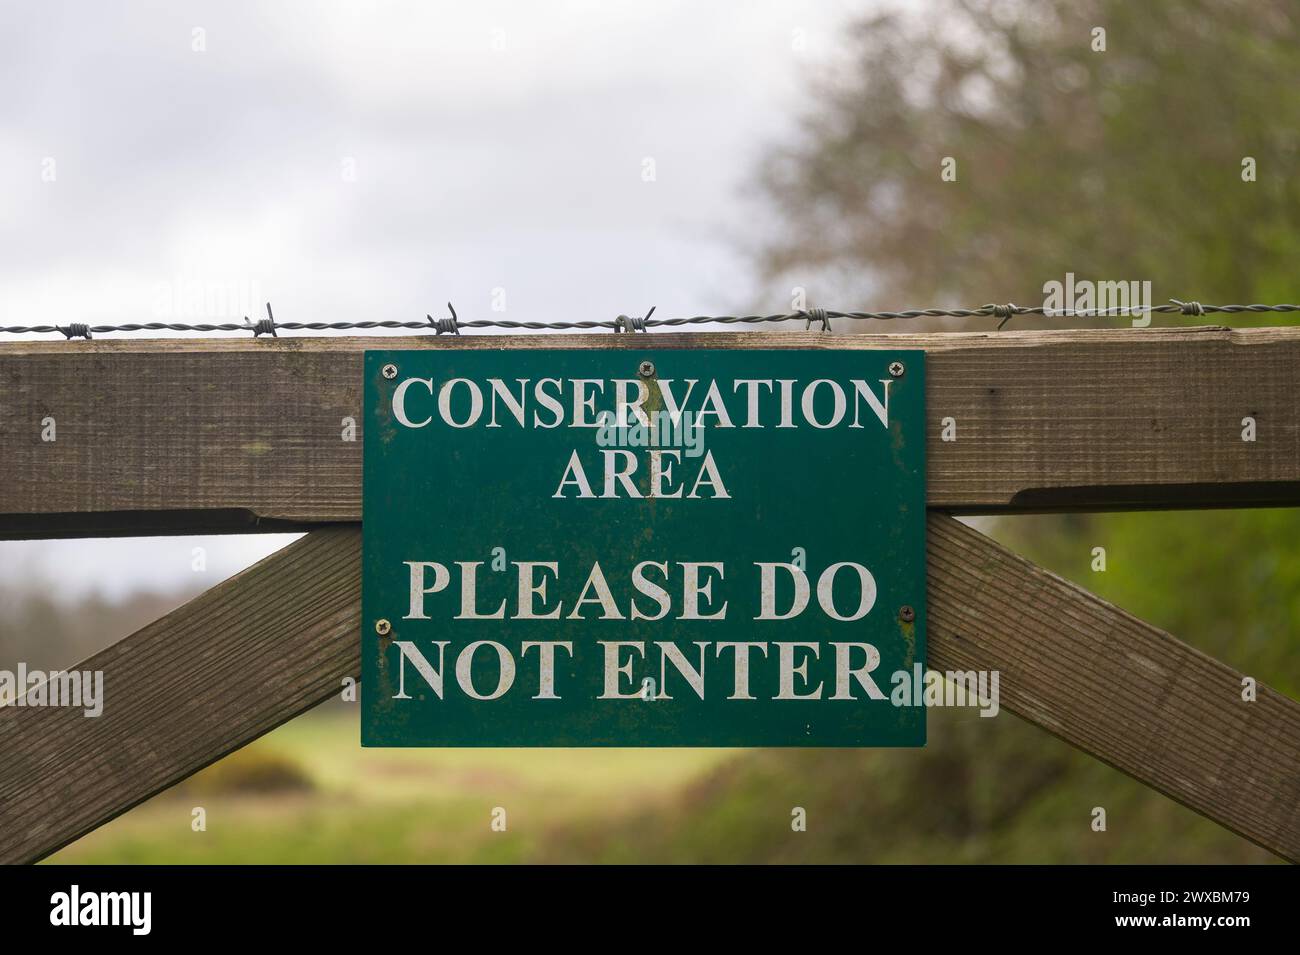 Conservation area, please do not enter sign on a wooden gate. Stock Photo